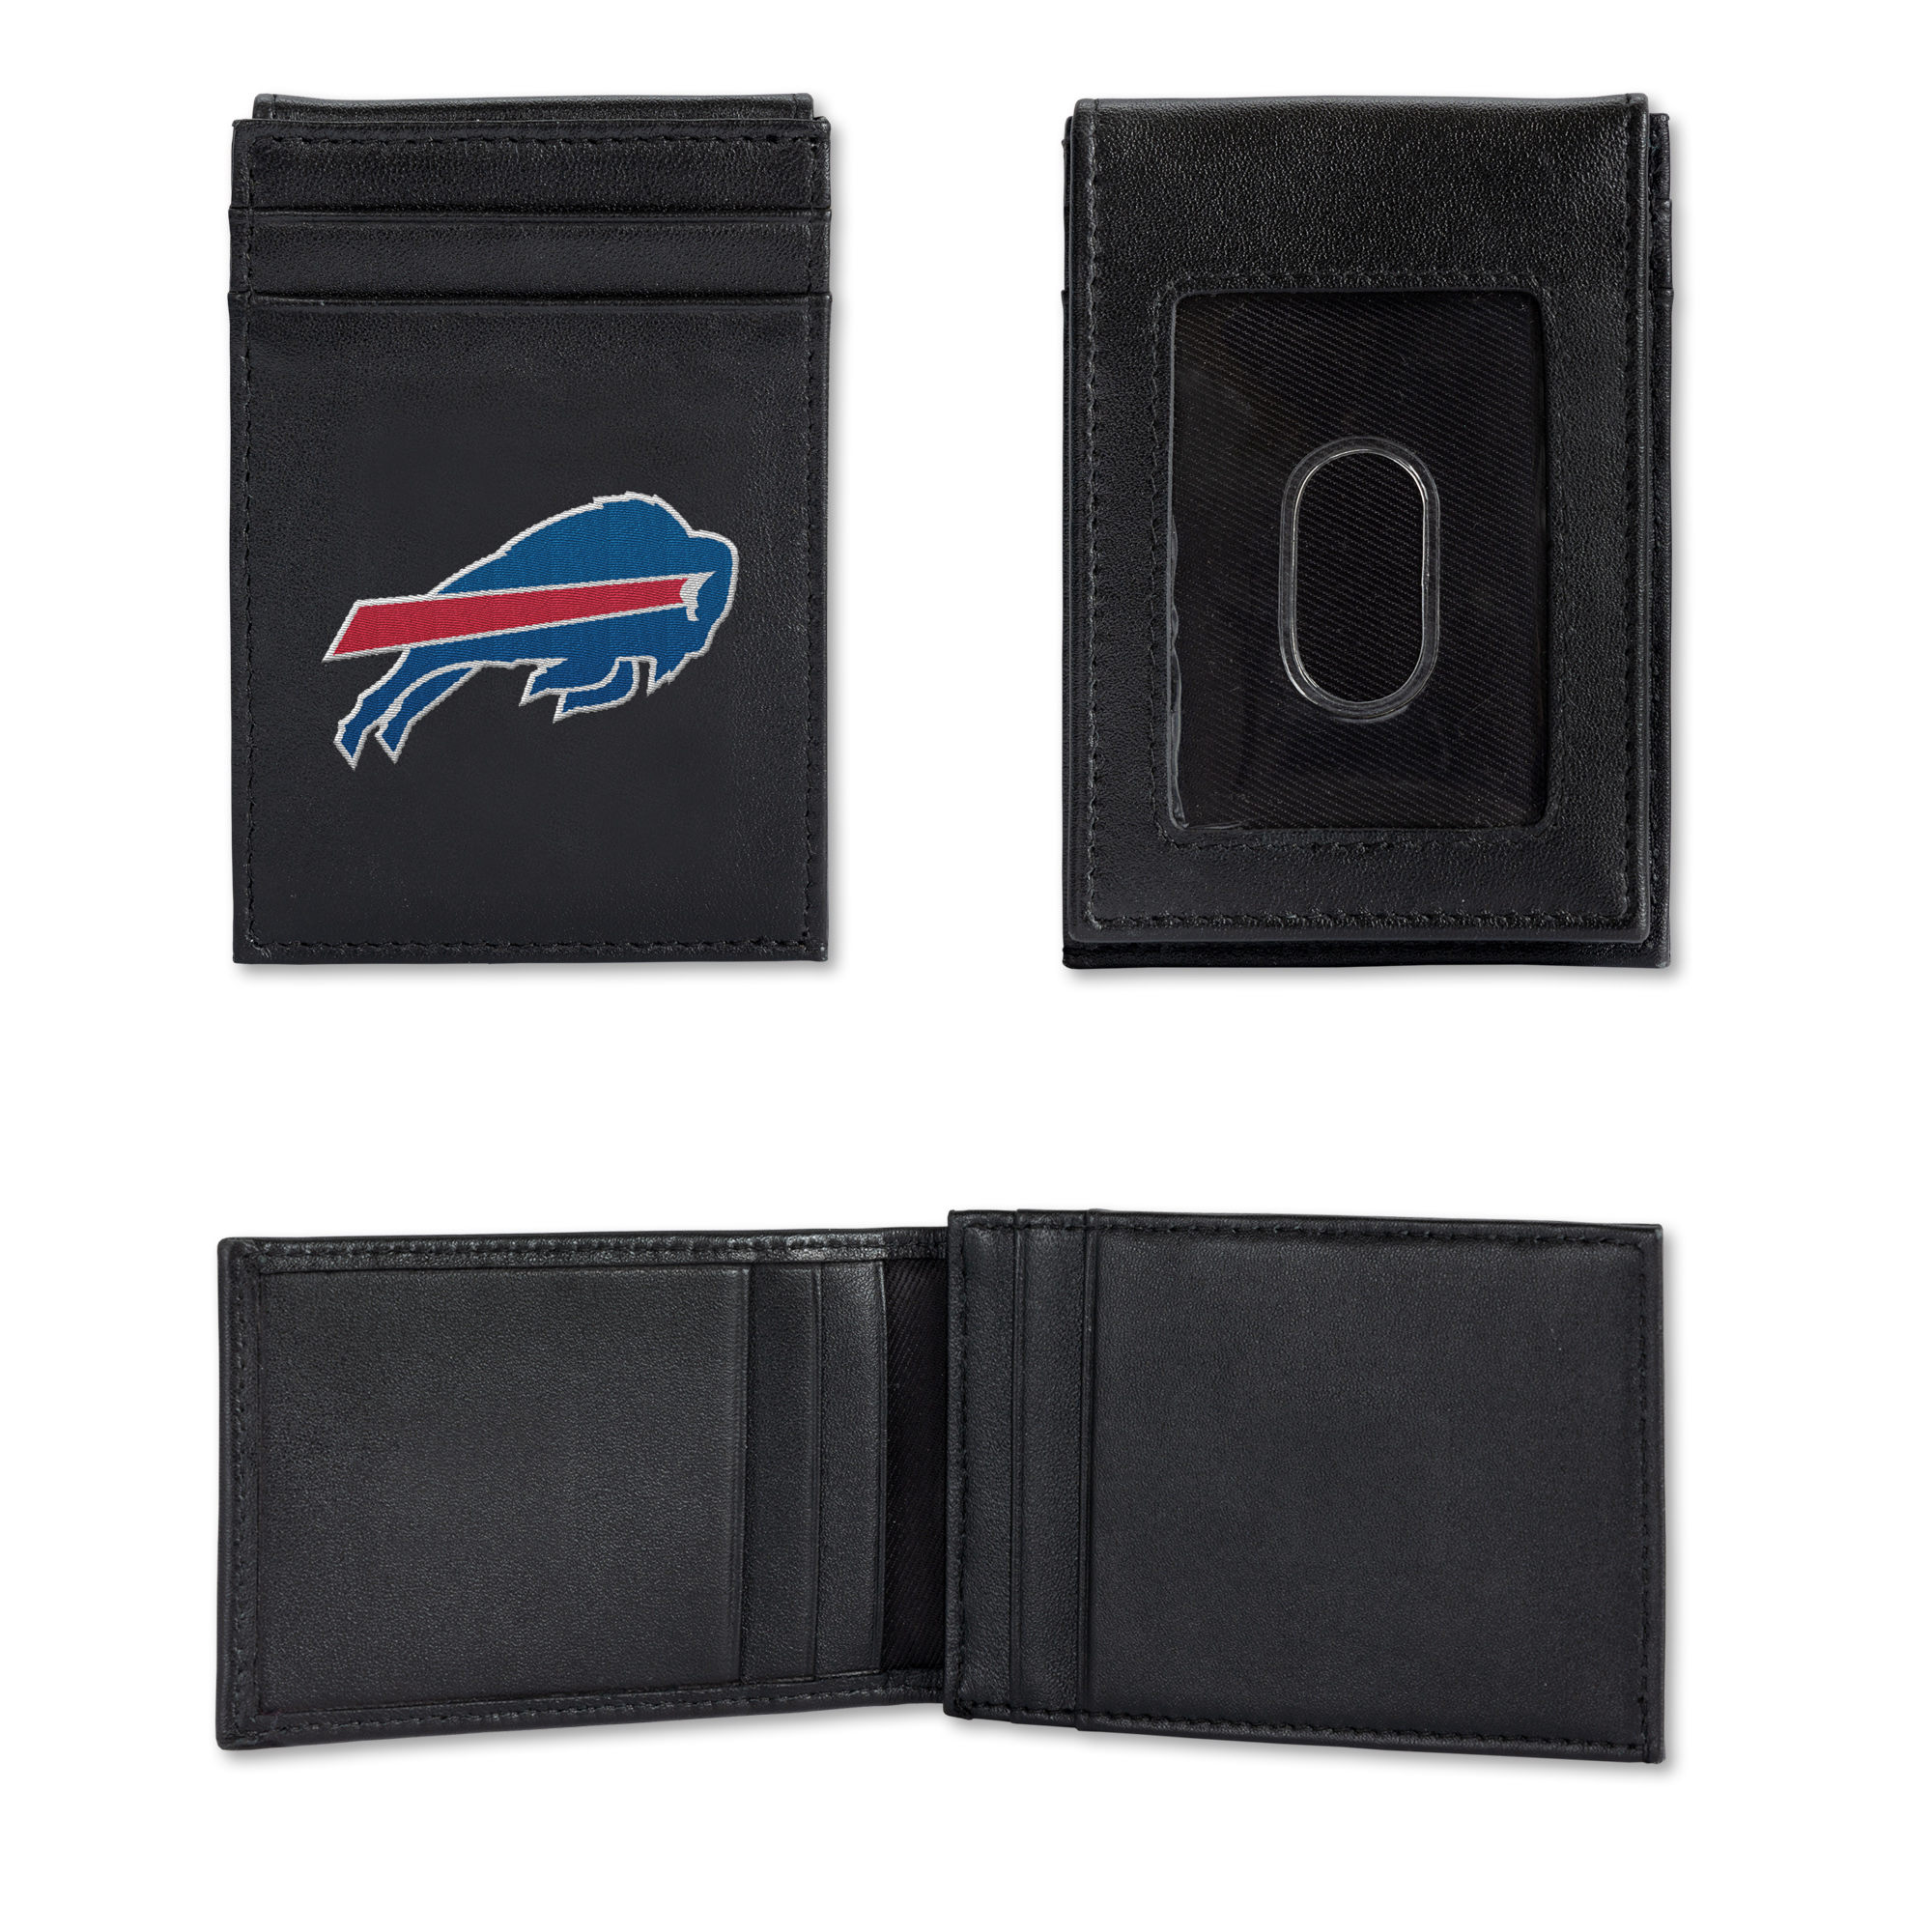 Rico NFL Rico Industries Buffalo Bills  Embroidered Front Pocket Wallet